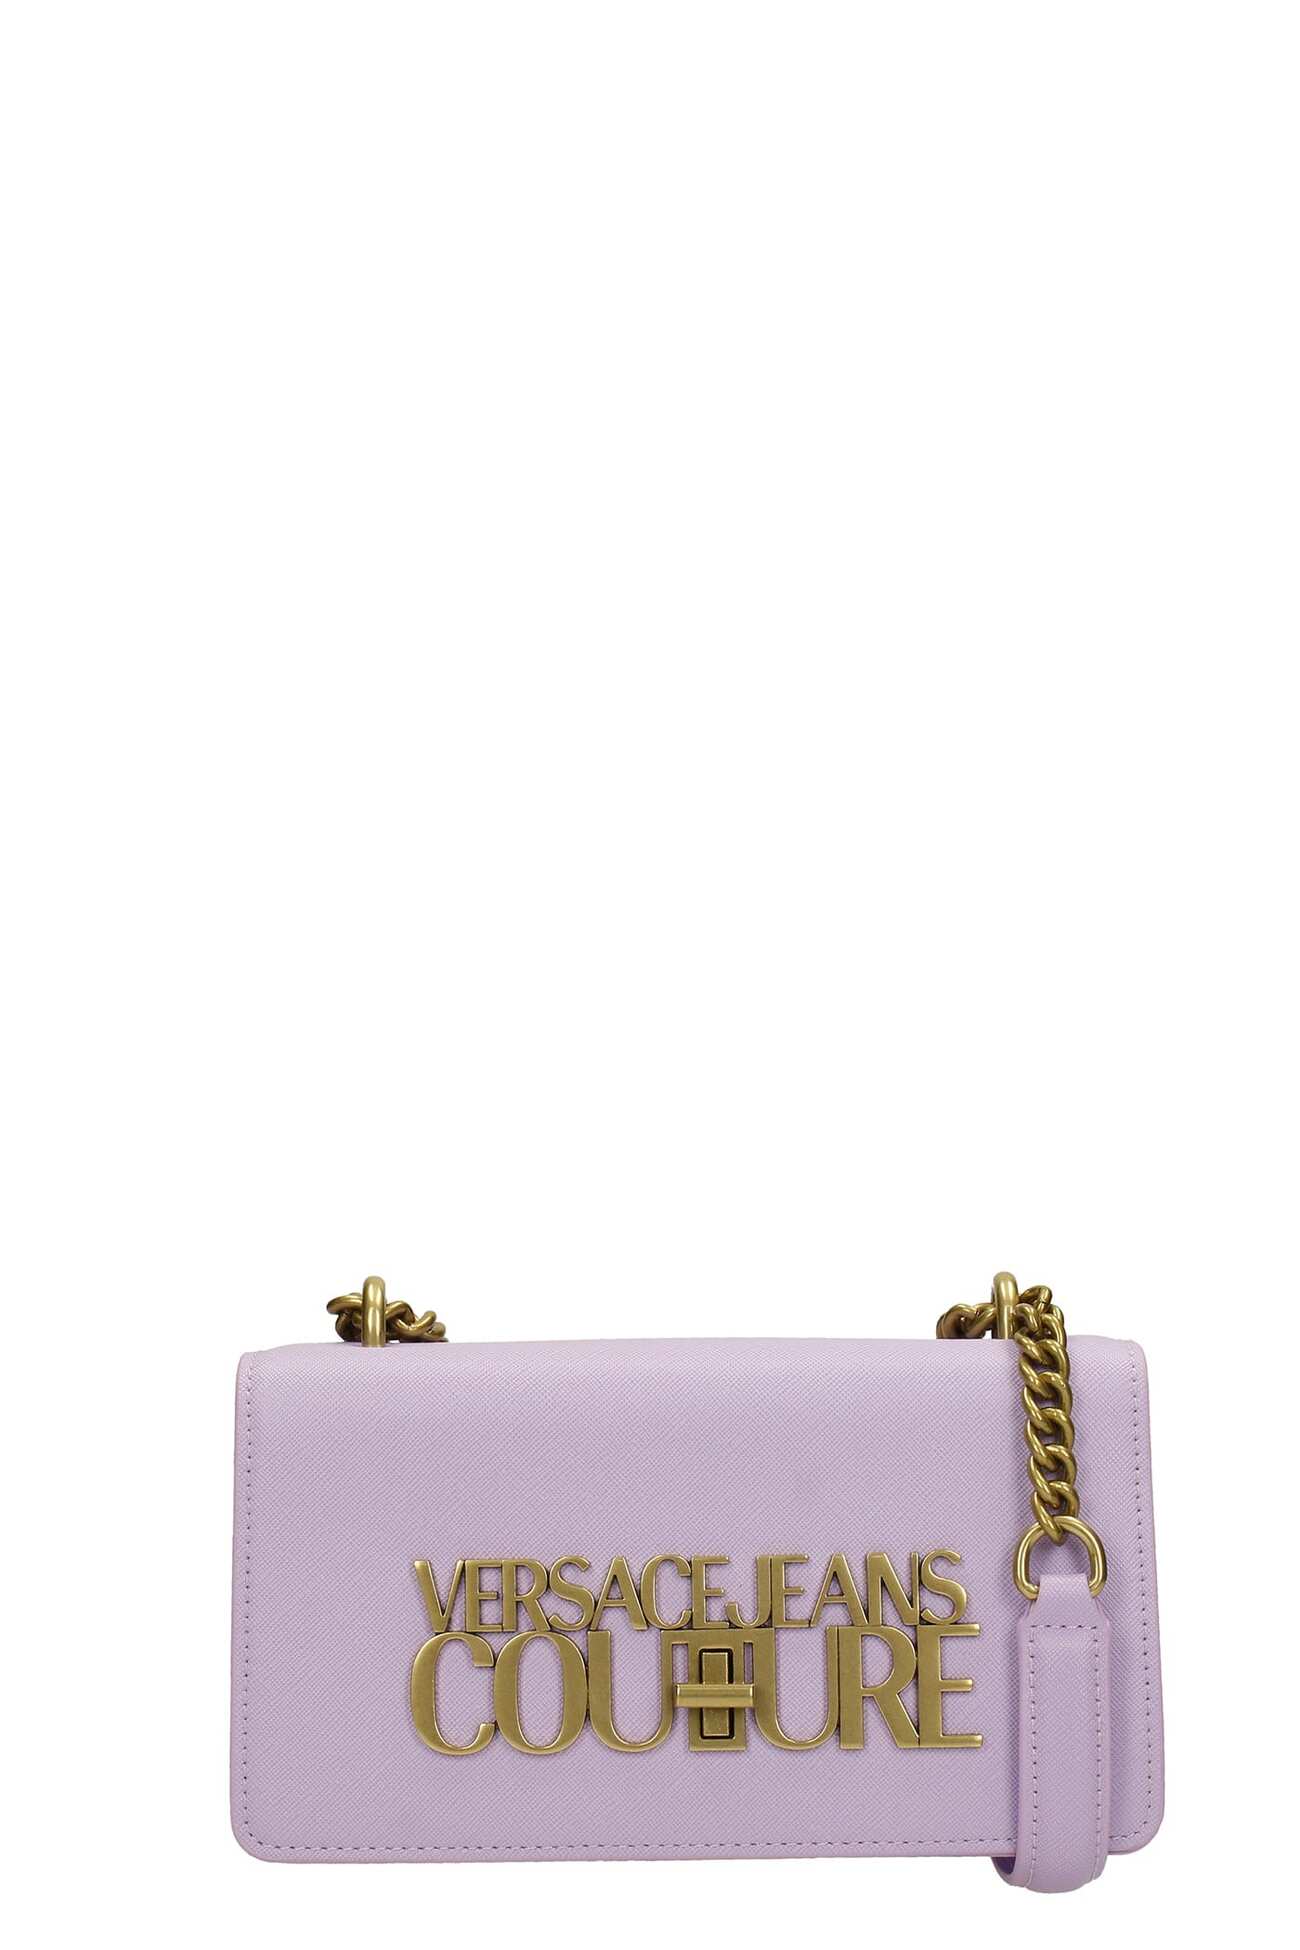 Versace Jeans Couture Shoulder Bag In Viola Faux Leather in pink